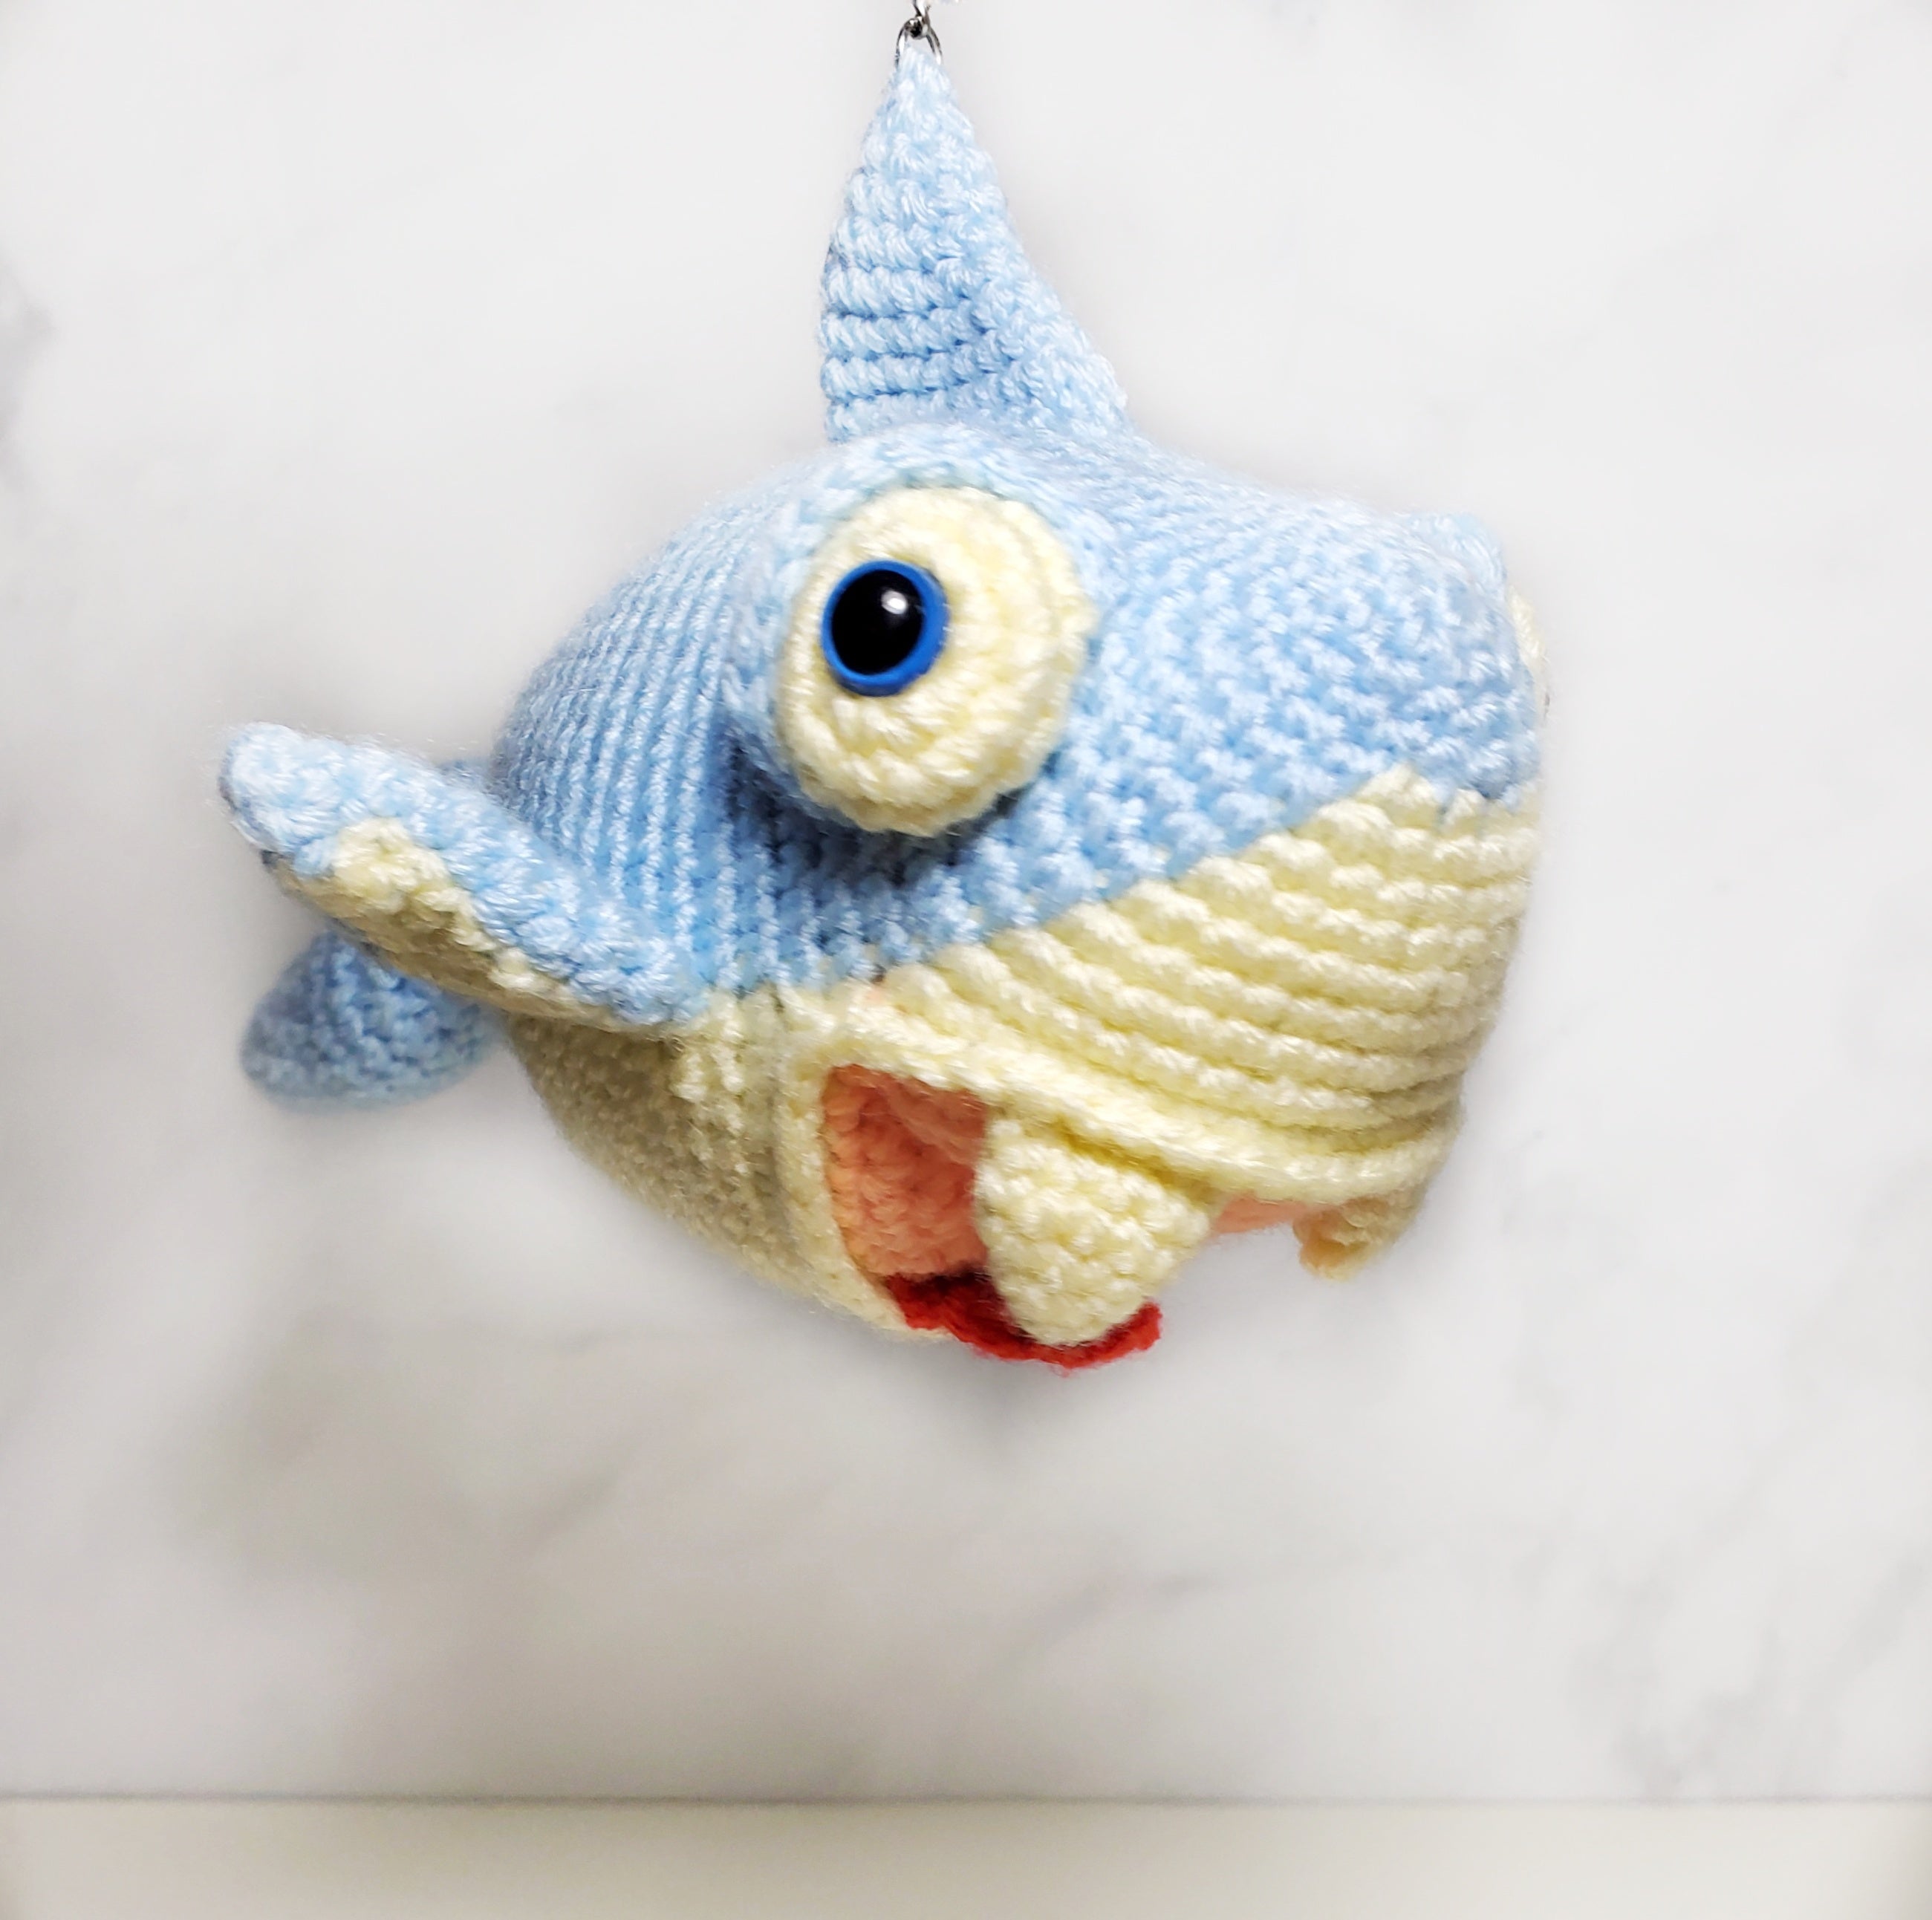 Blue Shark Plush Toy - 9 Inches